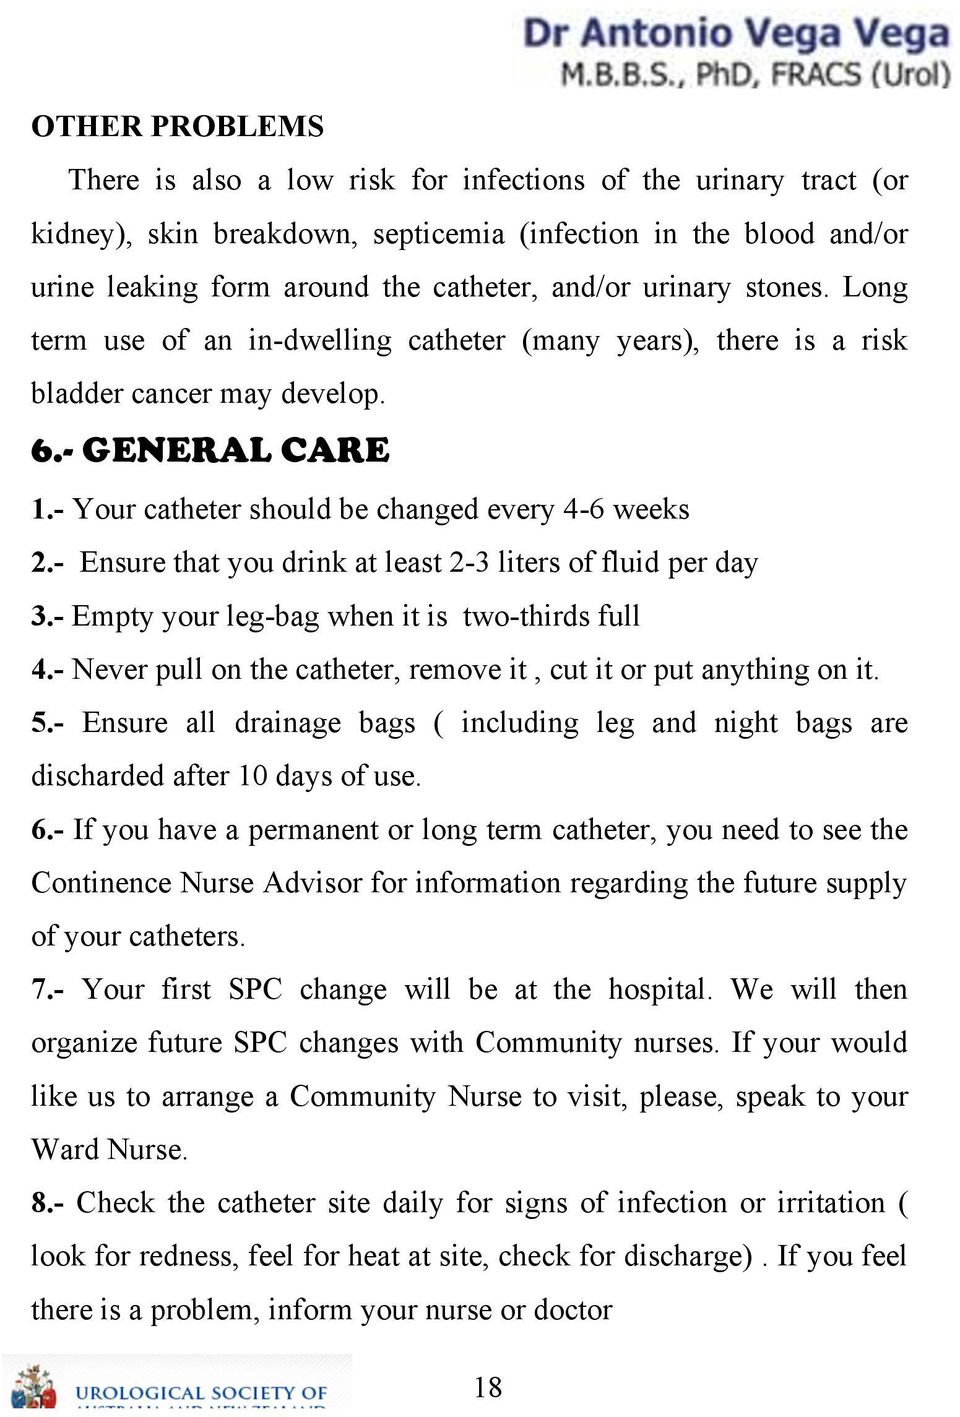 - Ensure that you drink at least 2-3 liters of fluid per day 3.- Empty your leg-bag when it is two-thirds full 4.- Never pull on the catheter, remove it, cut it or put anything on it. 5.